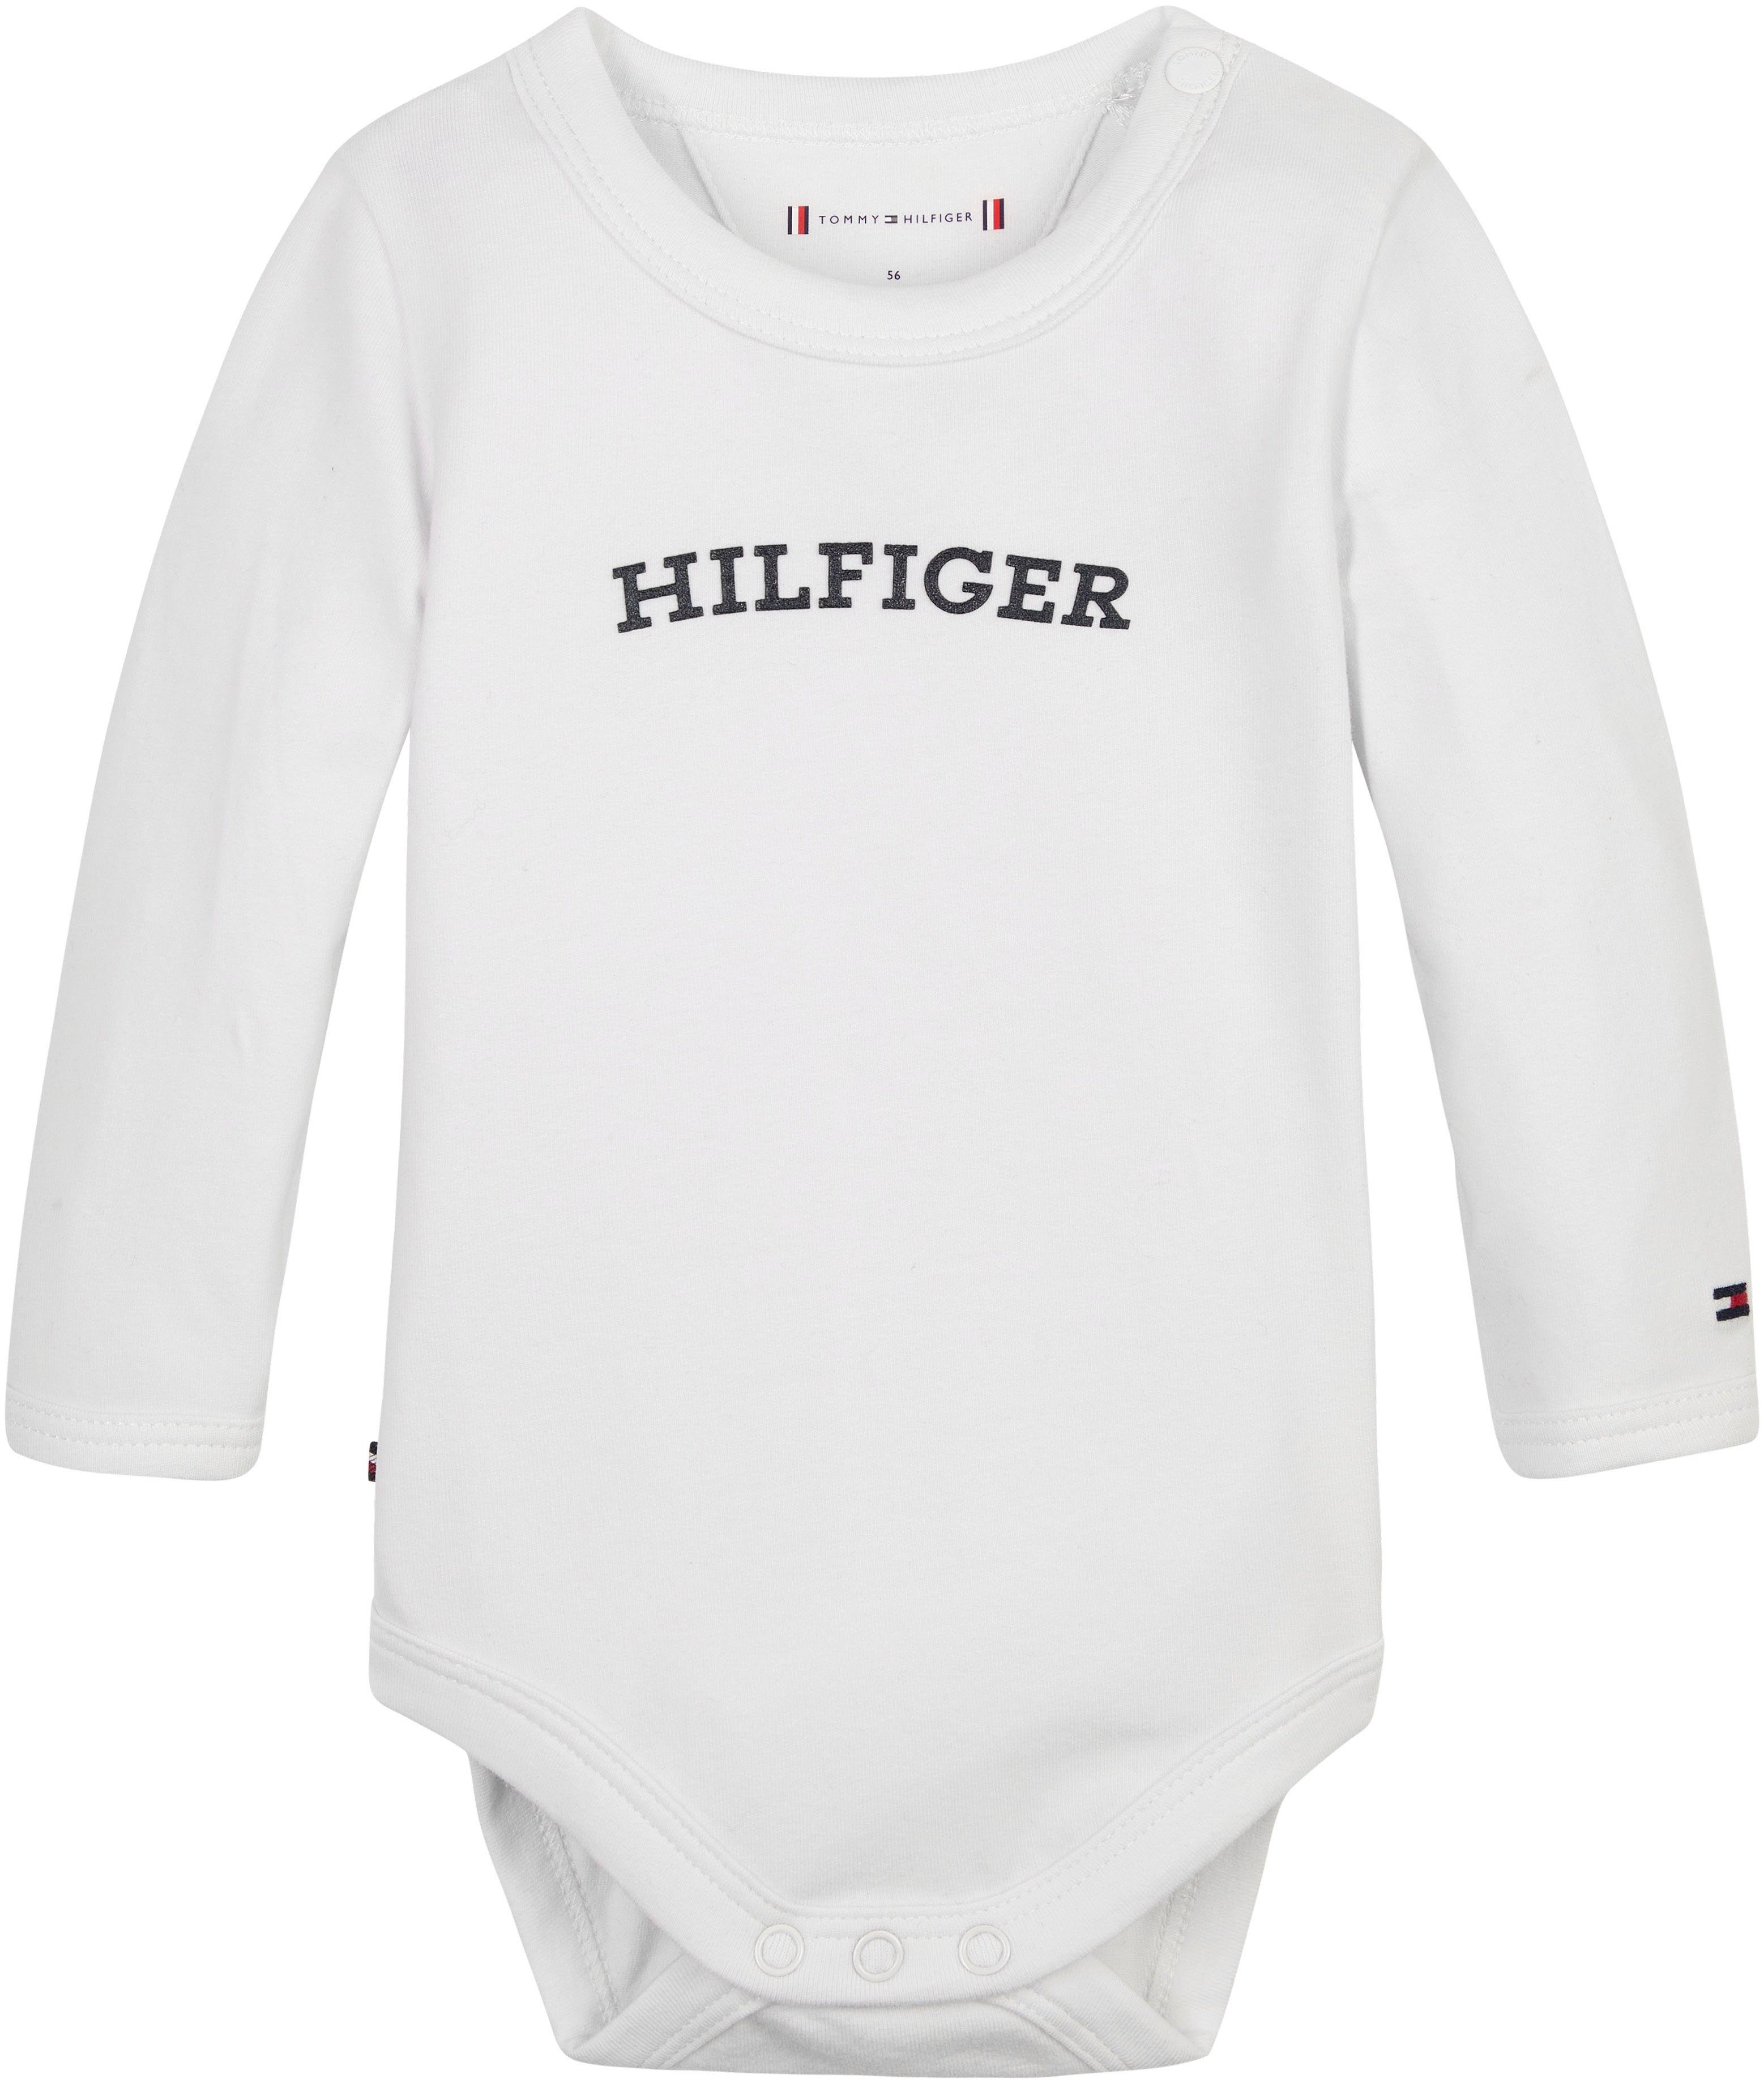 NU 20% KORTING: Tommy Hilfiger Body BABY CURVED MONOTYPE BODY L-S